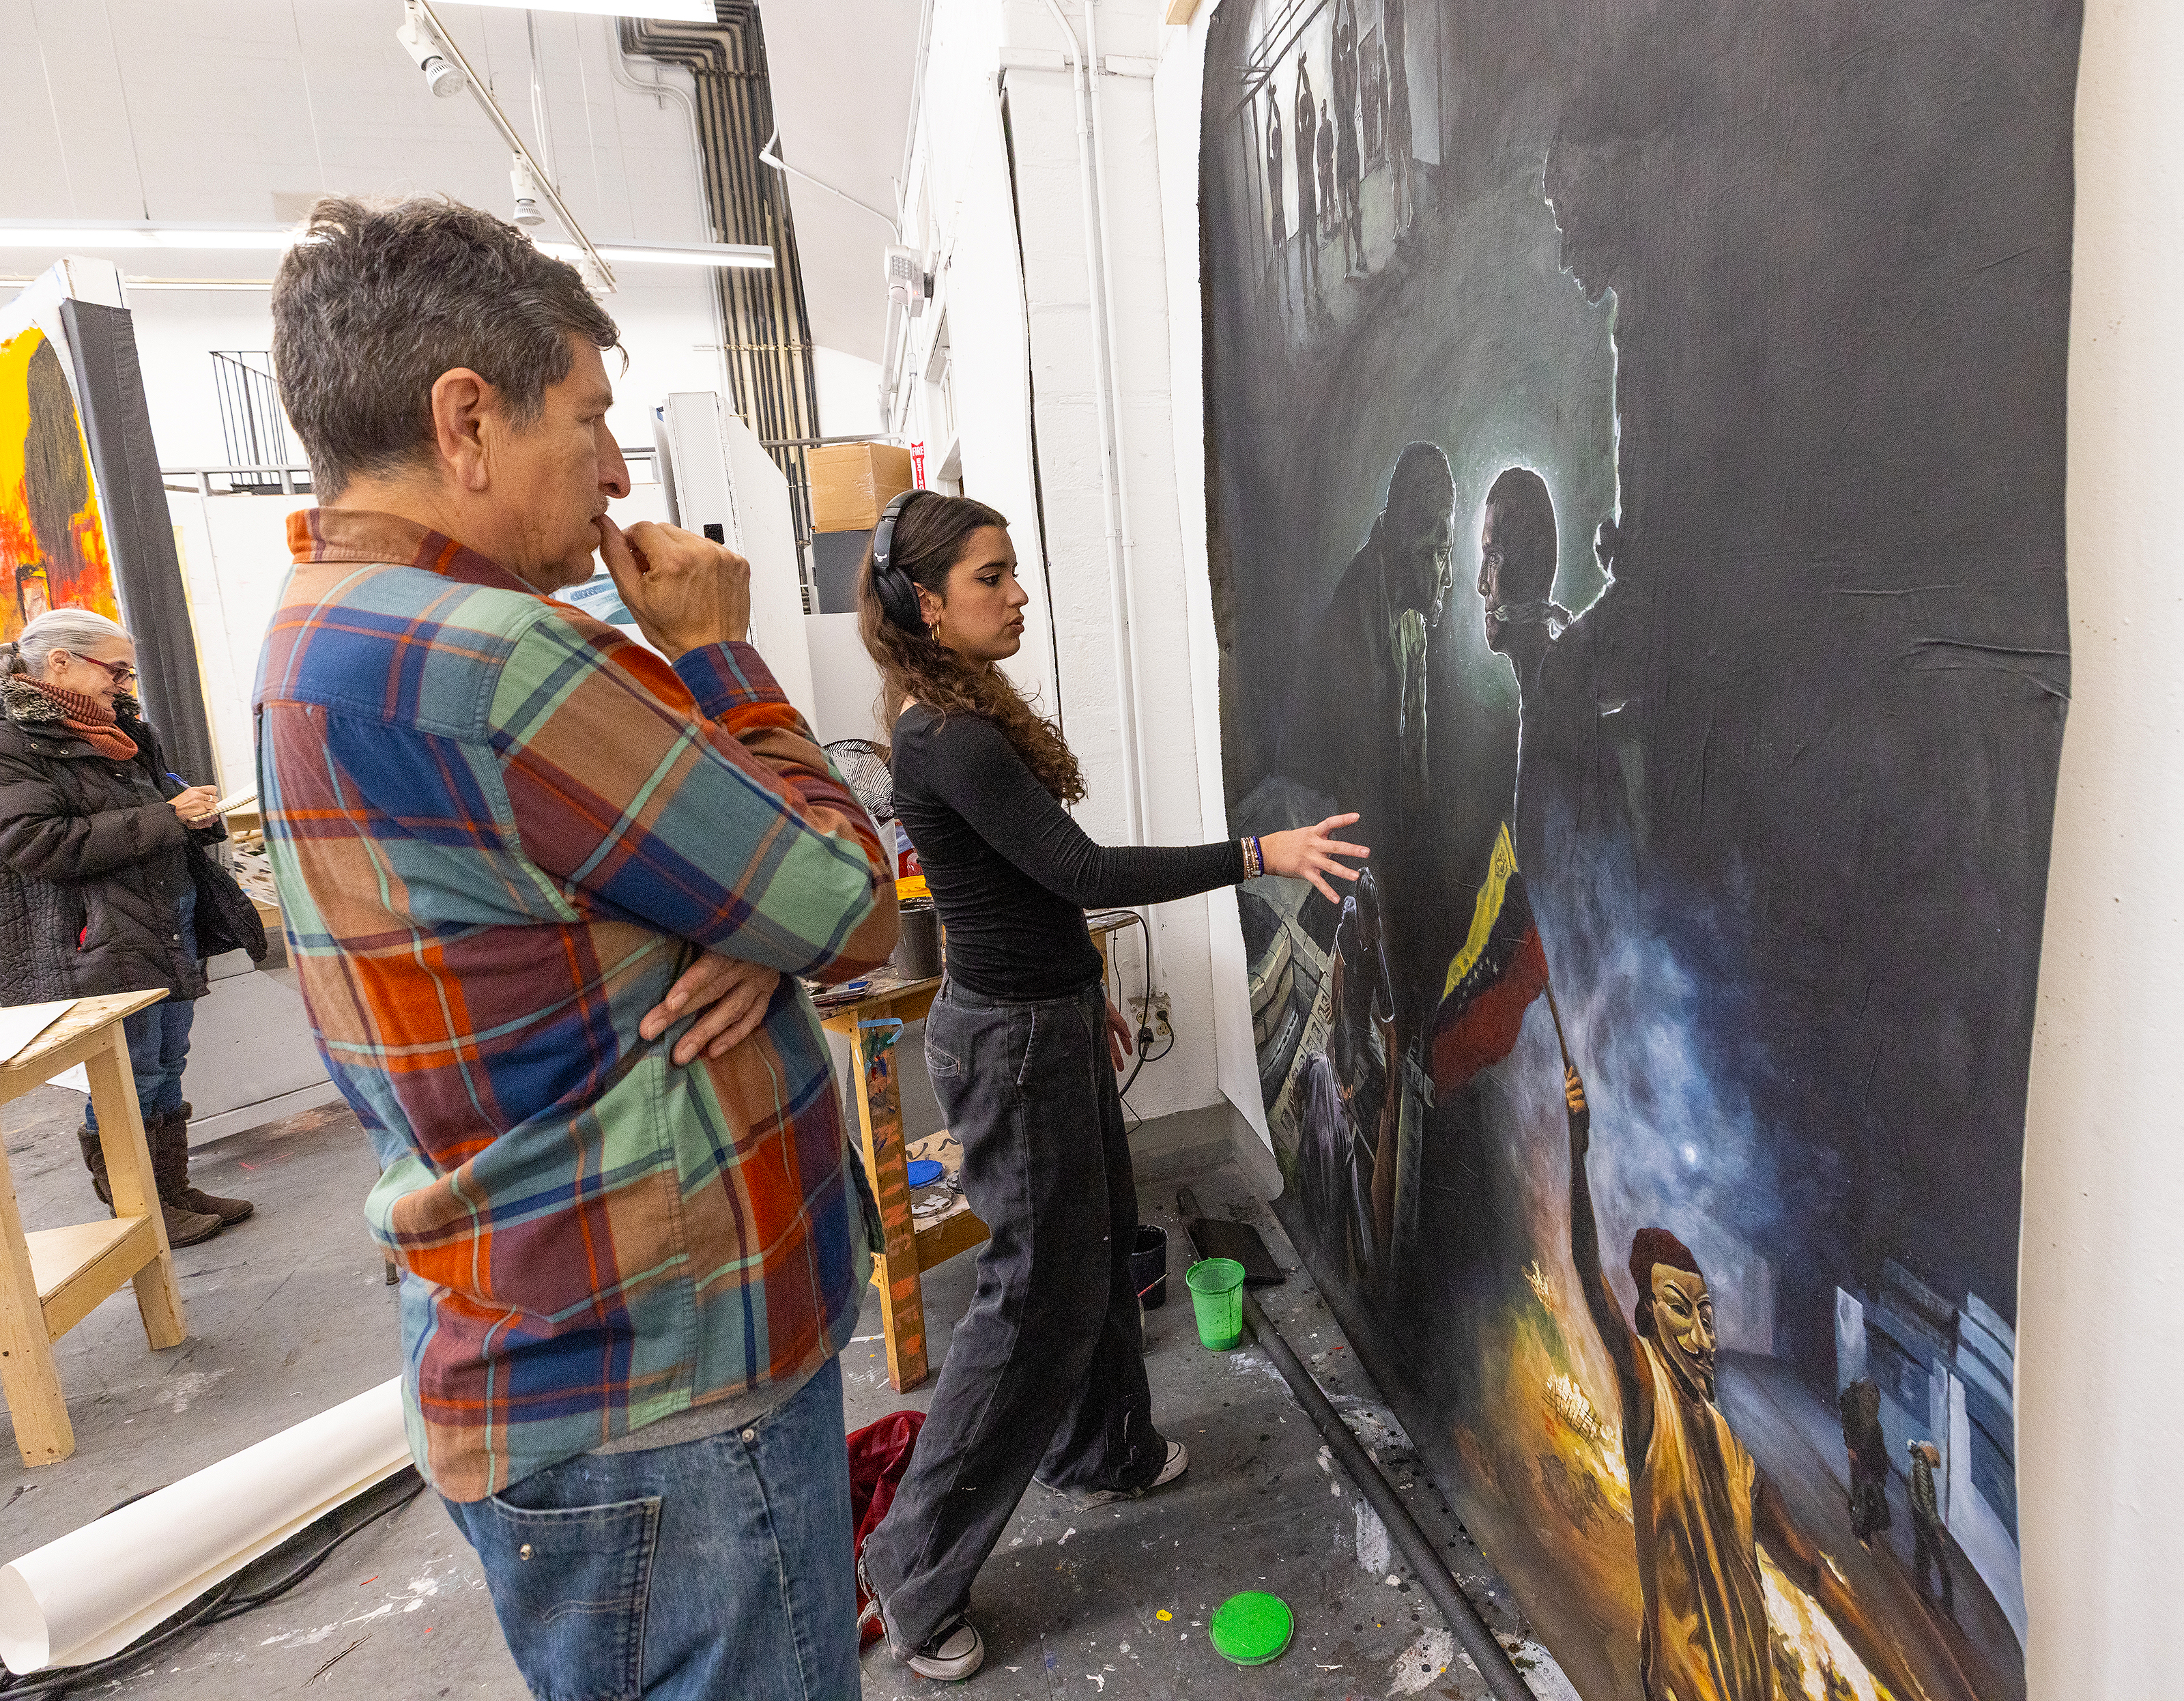 Ariana Chacon discusses a painting in progress with faculty member Mark Flores